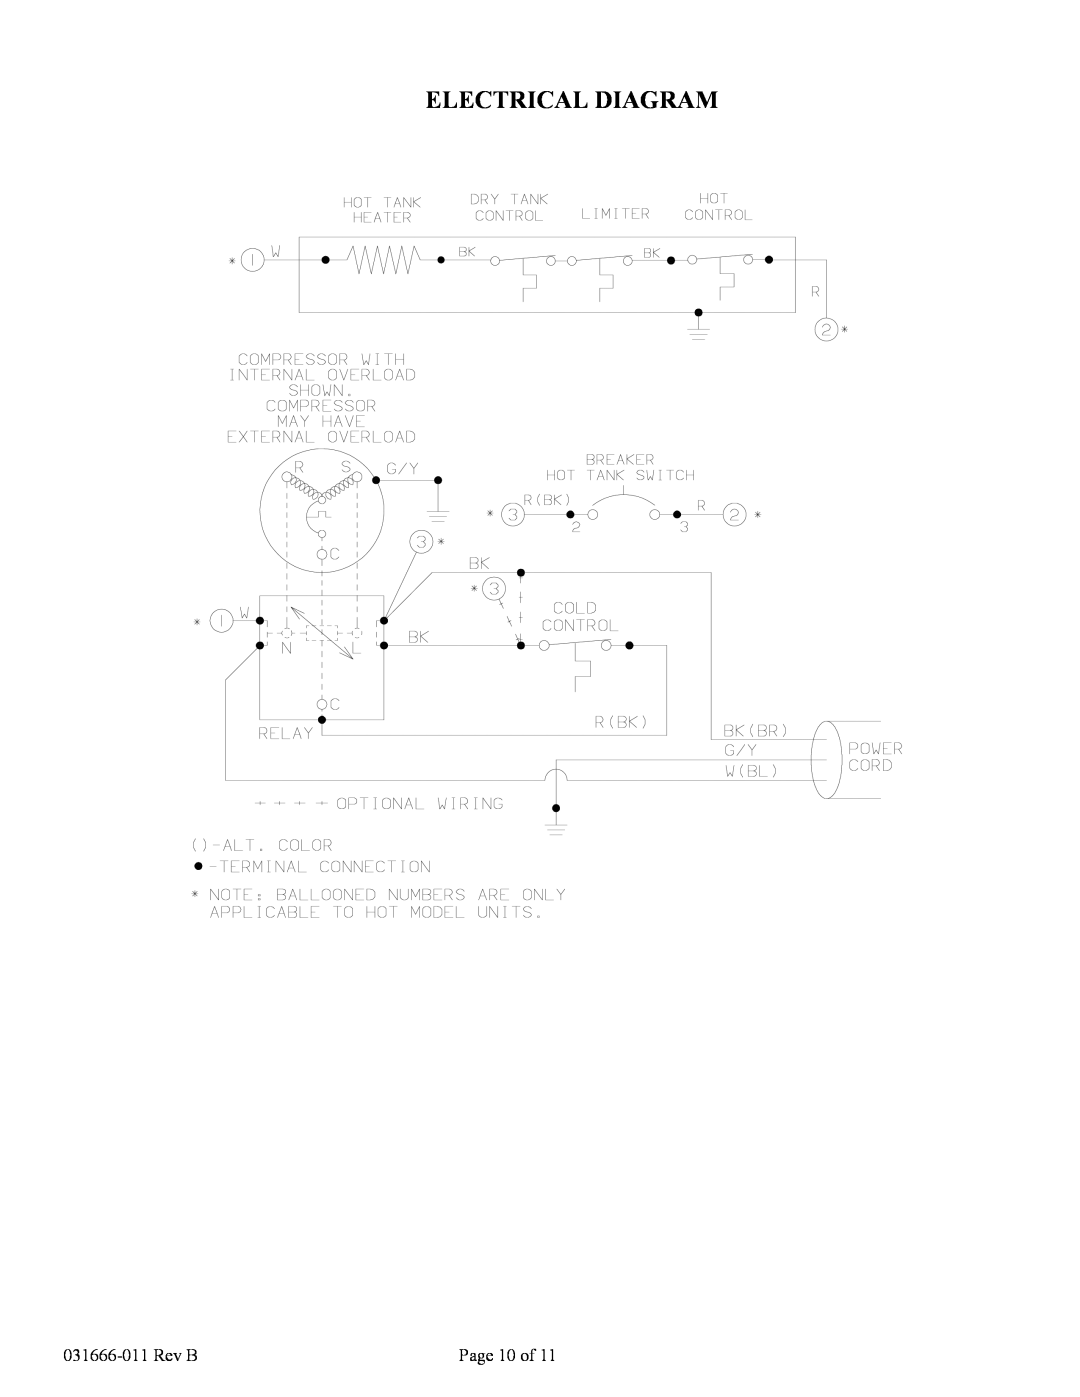 Oasis Concepts PHT1AQK specifications Electrical Diagram, 031666-011Rev B, Page 10 of 